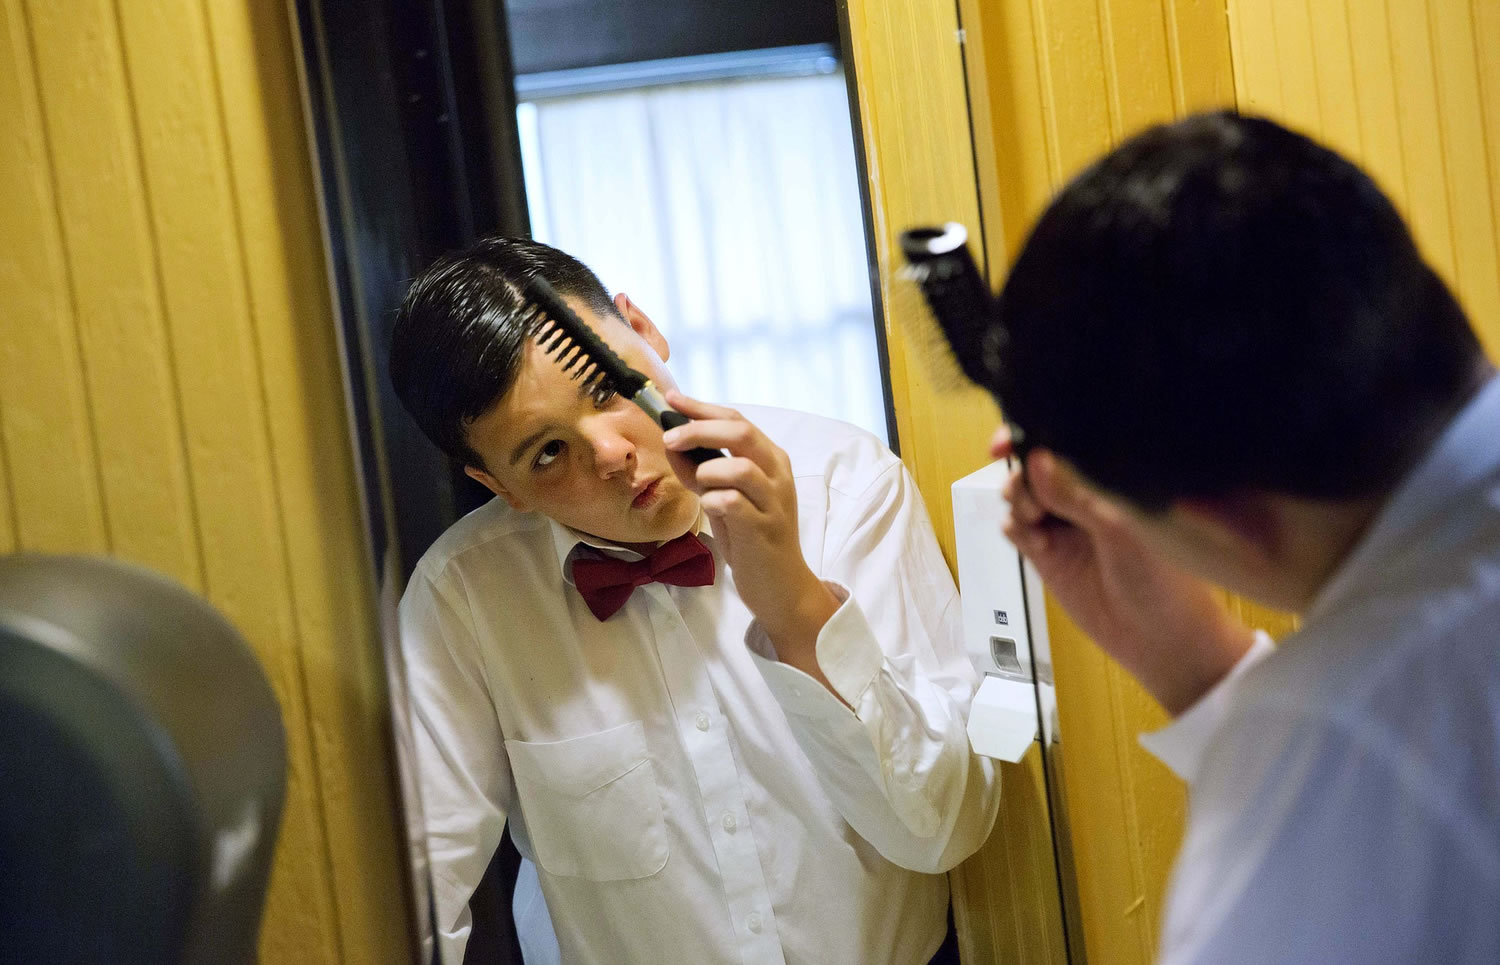 Photos by DAVID GOLDMAN/Associated Press
Camper Colin Billings, 12, of Yorktown, Va., combs his hair Thursday before attending a dance on the final night at Camp Twitch and Shout, a camp for children with Touretteu2019s Syndrome in Winder, Ga. It was the first time Billings asked a girl to a dance. She said yes.